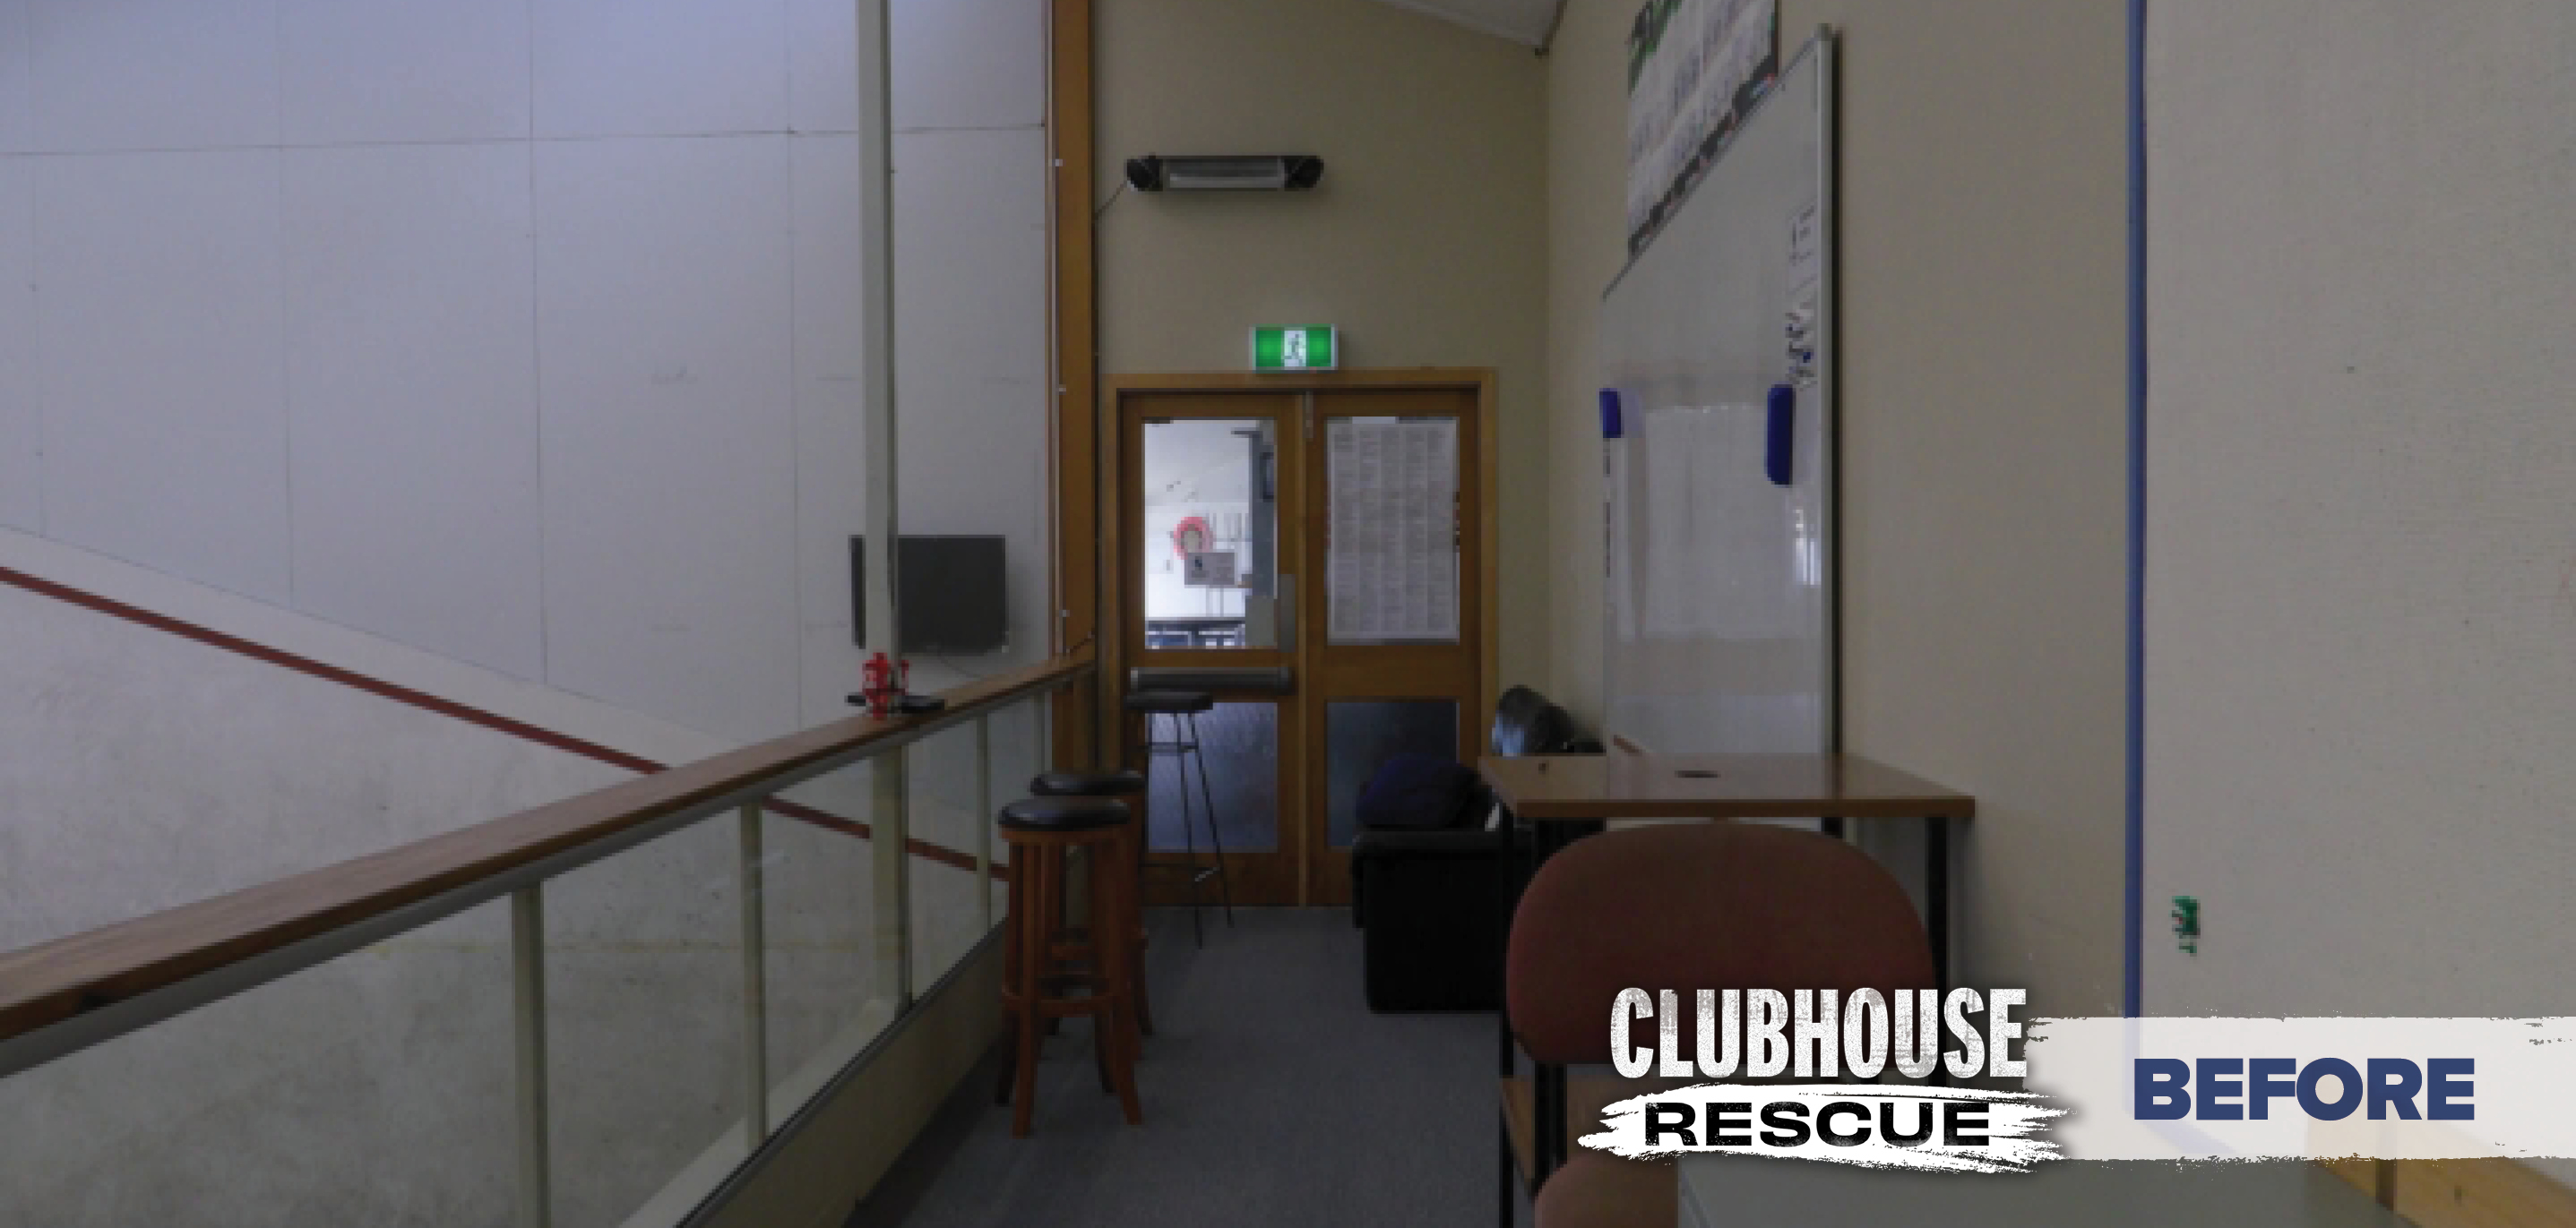 Clubhouse Ep 2 - Before Pic 7